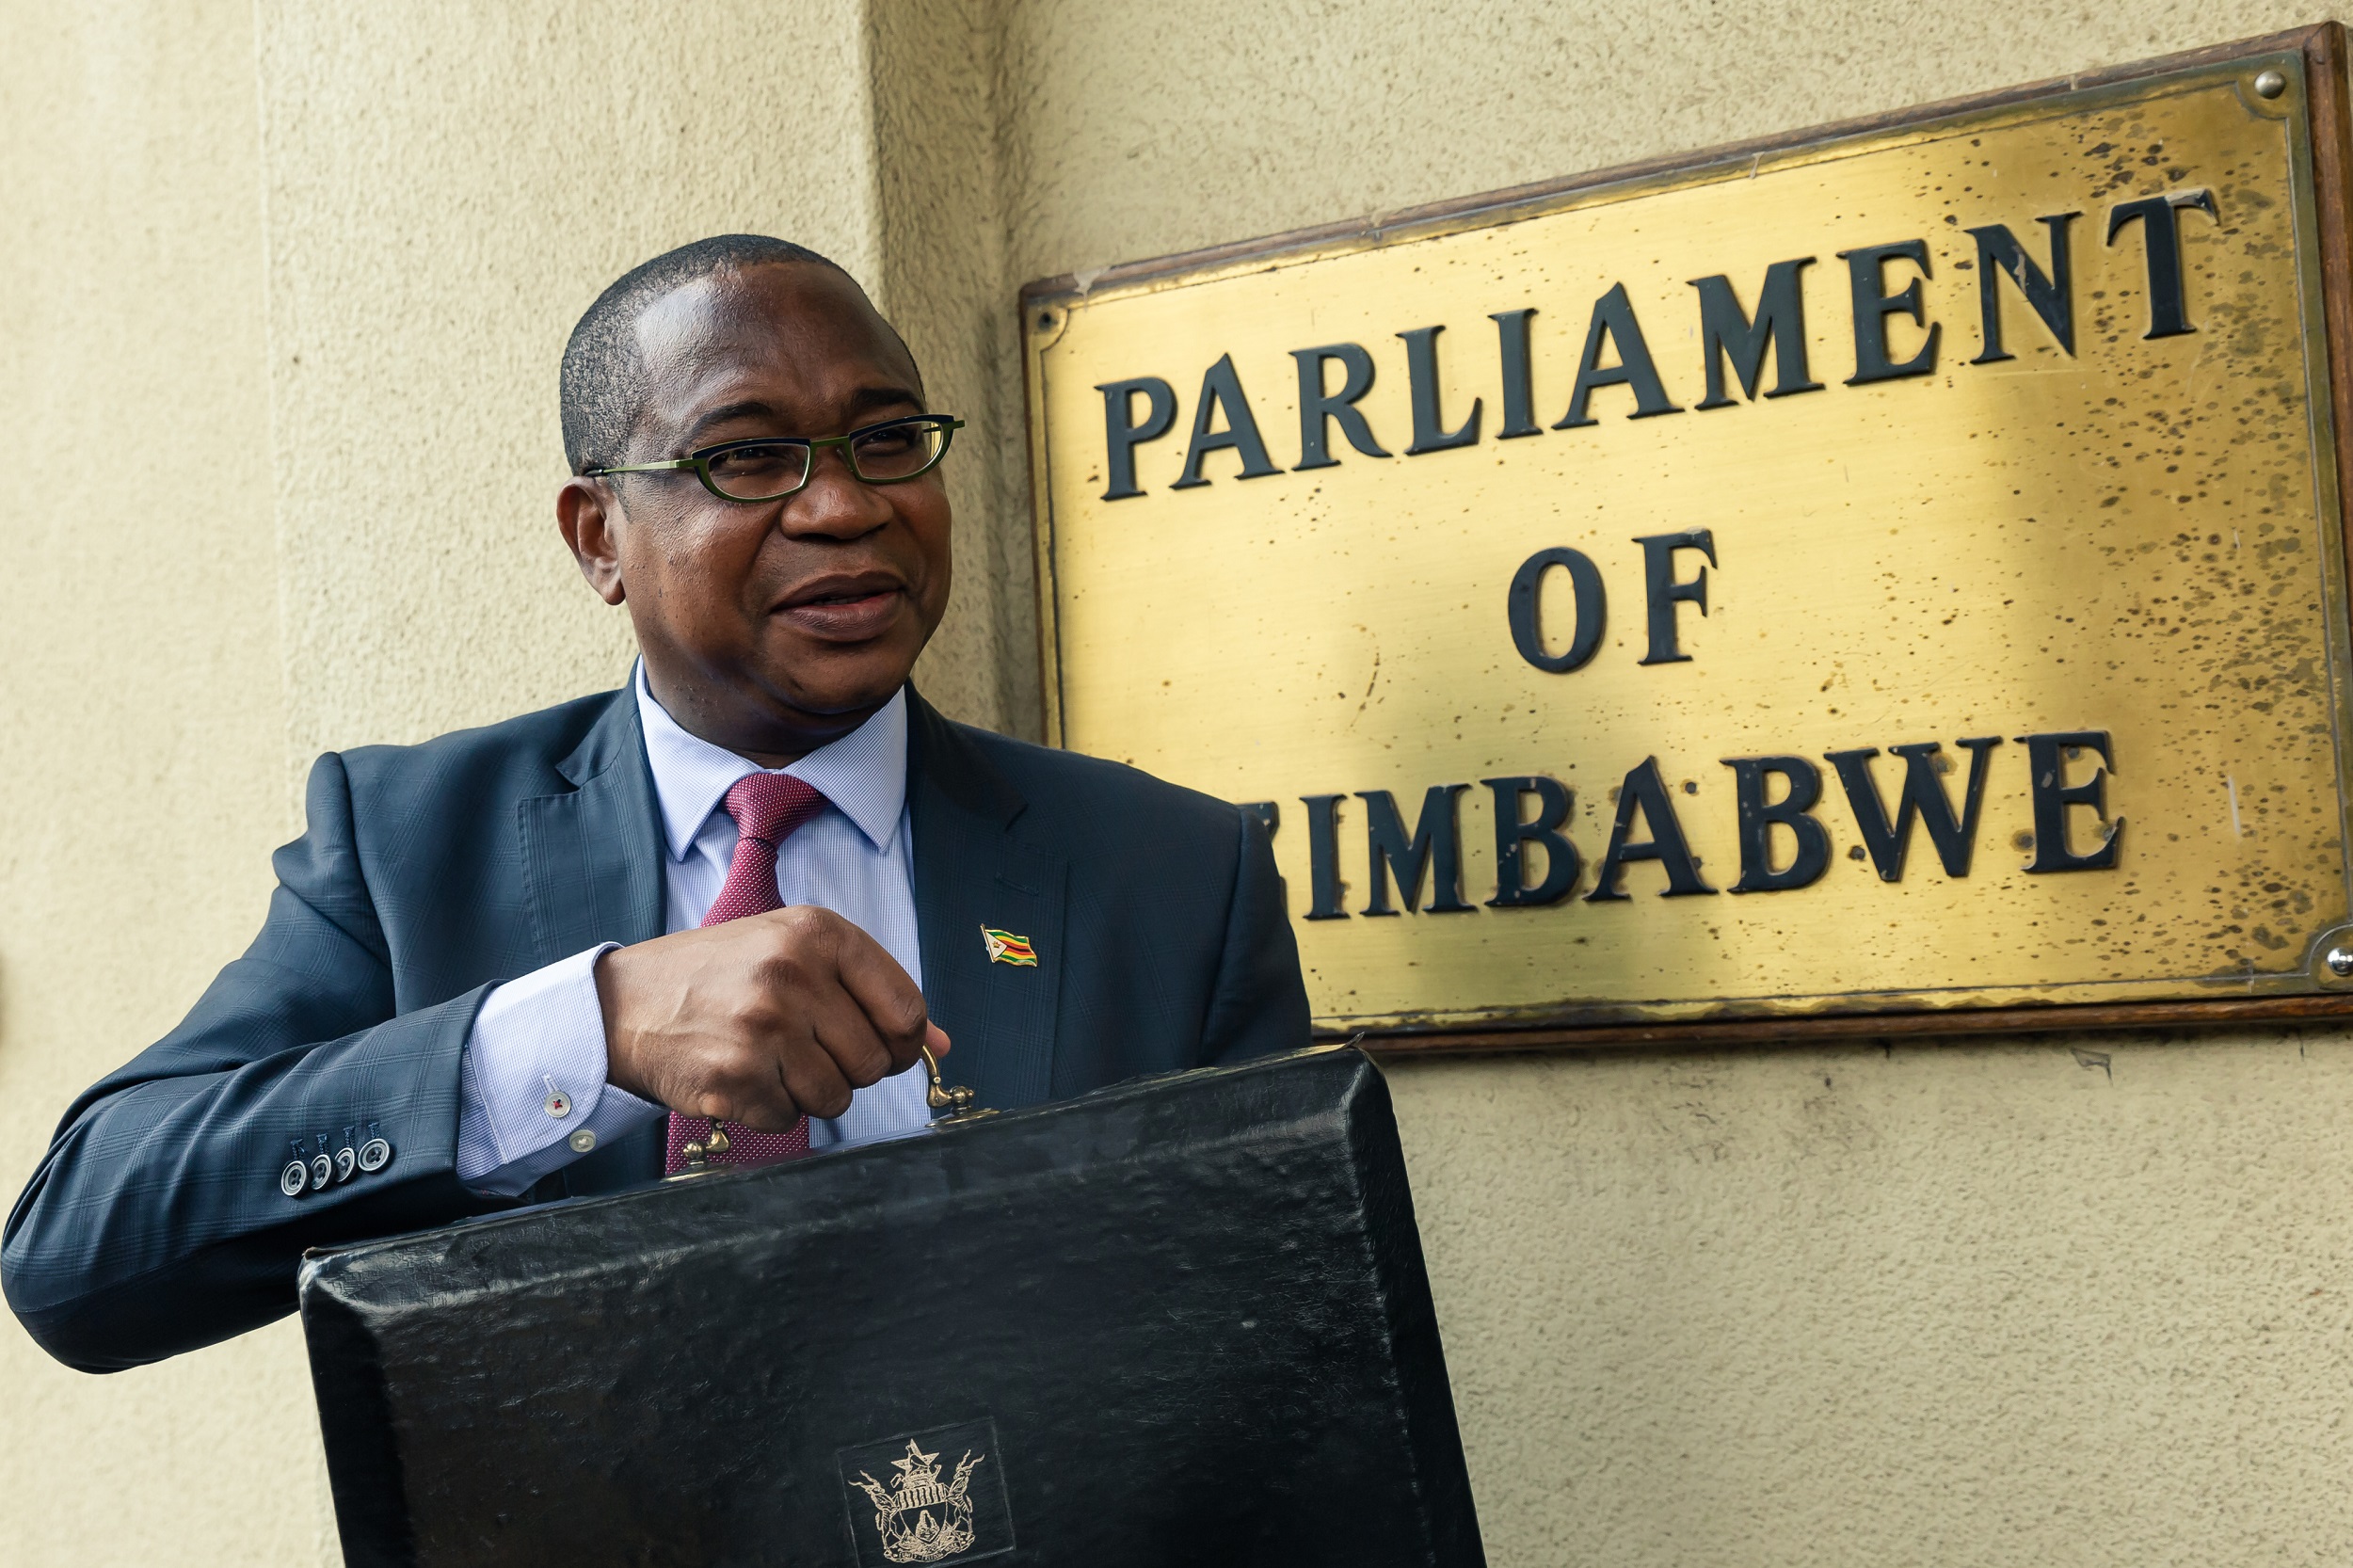 Zimbabwe Finance Minister Mthuli Ncube arrives at the Parliament of Zimbabwe to present the national annual budget, a few days after the introduction of a new currency in the country, in Harare, on November 14, 2019.